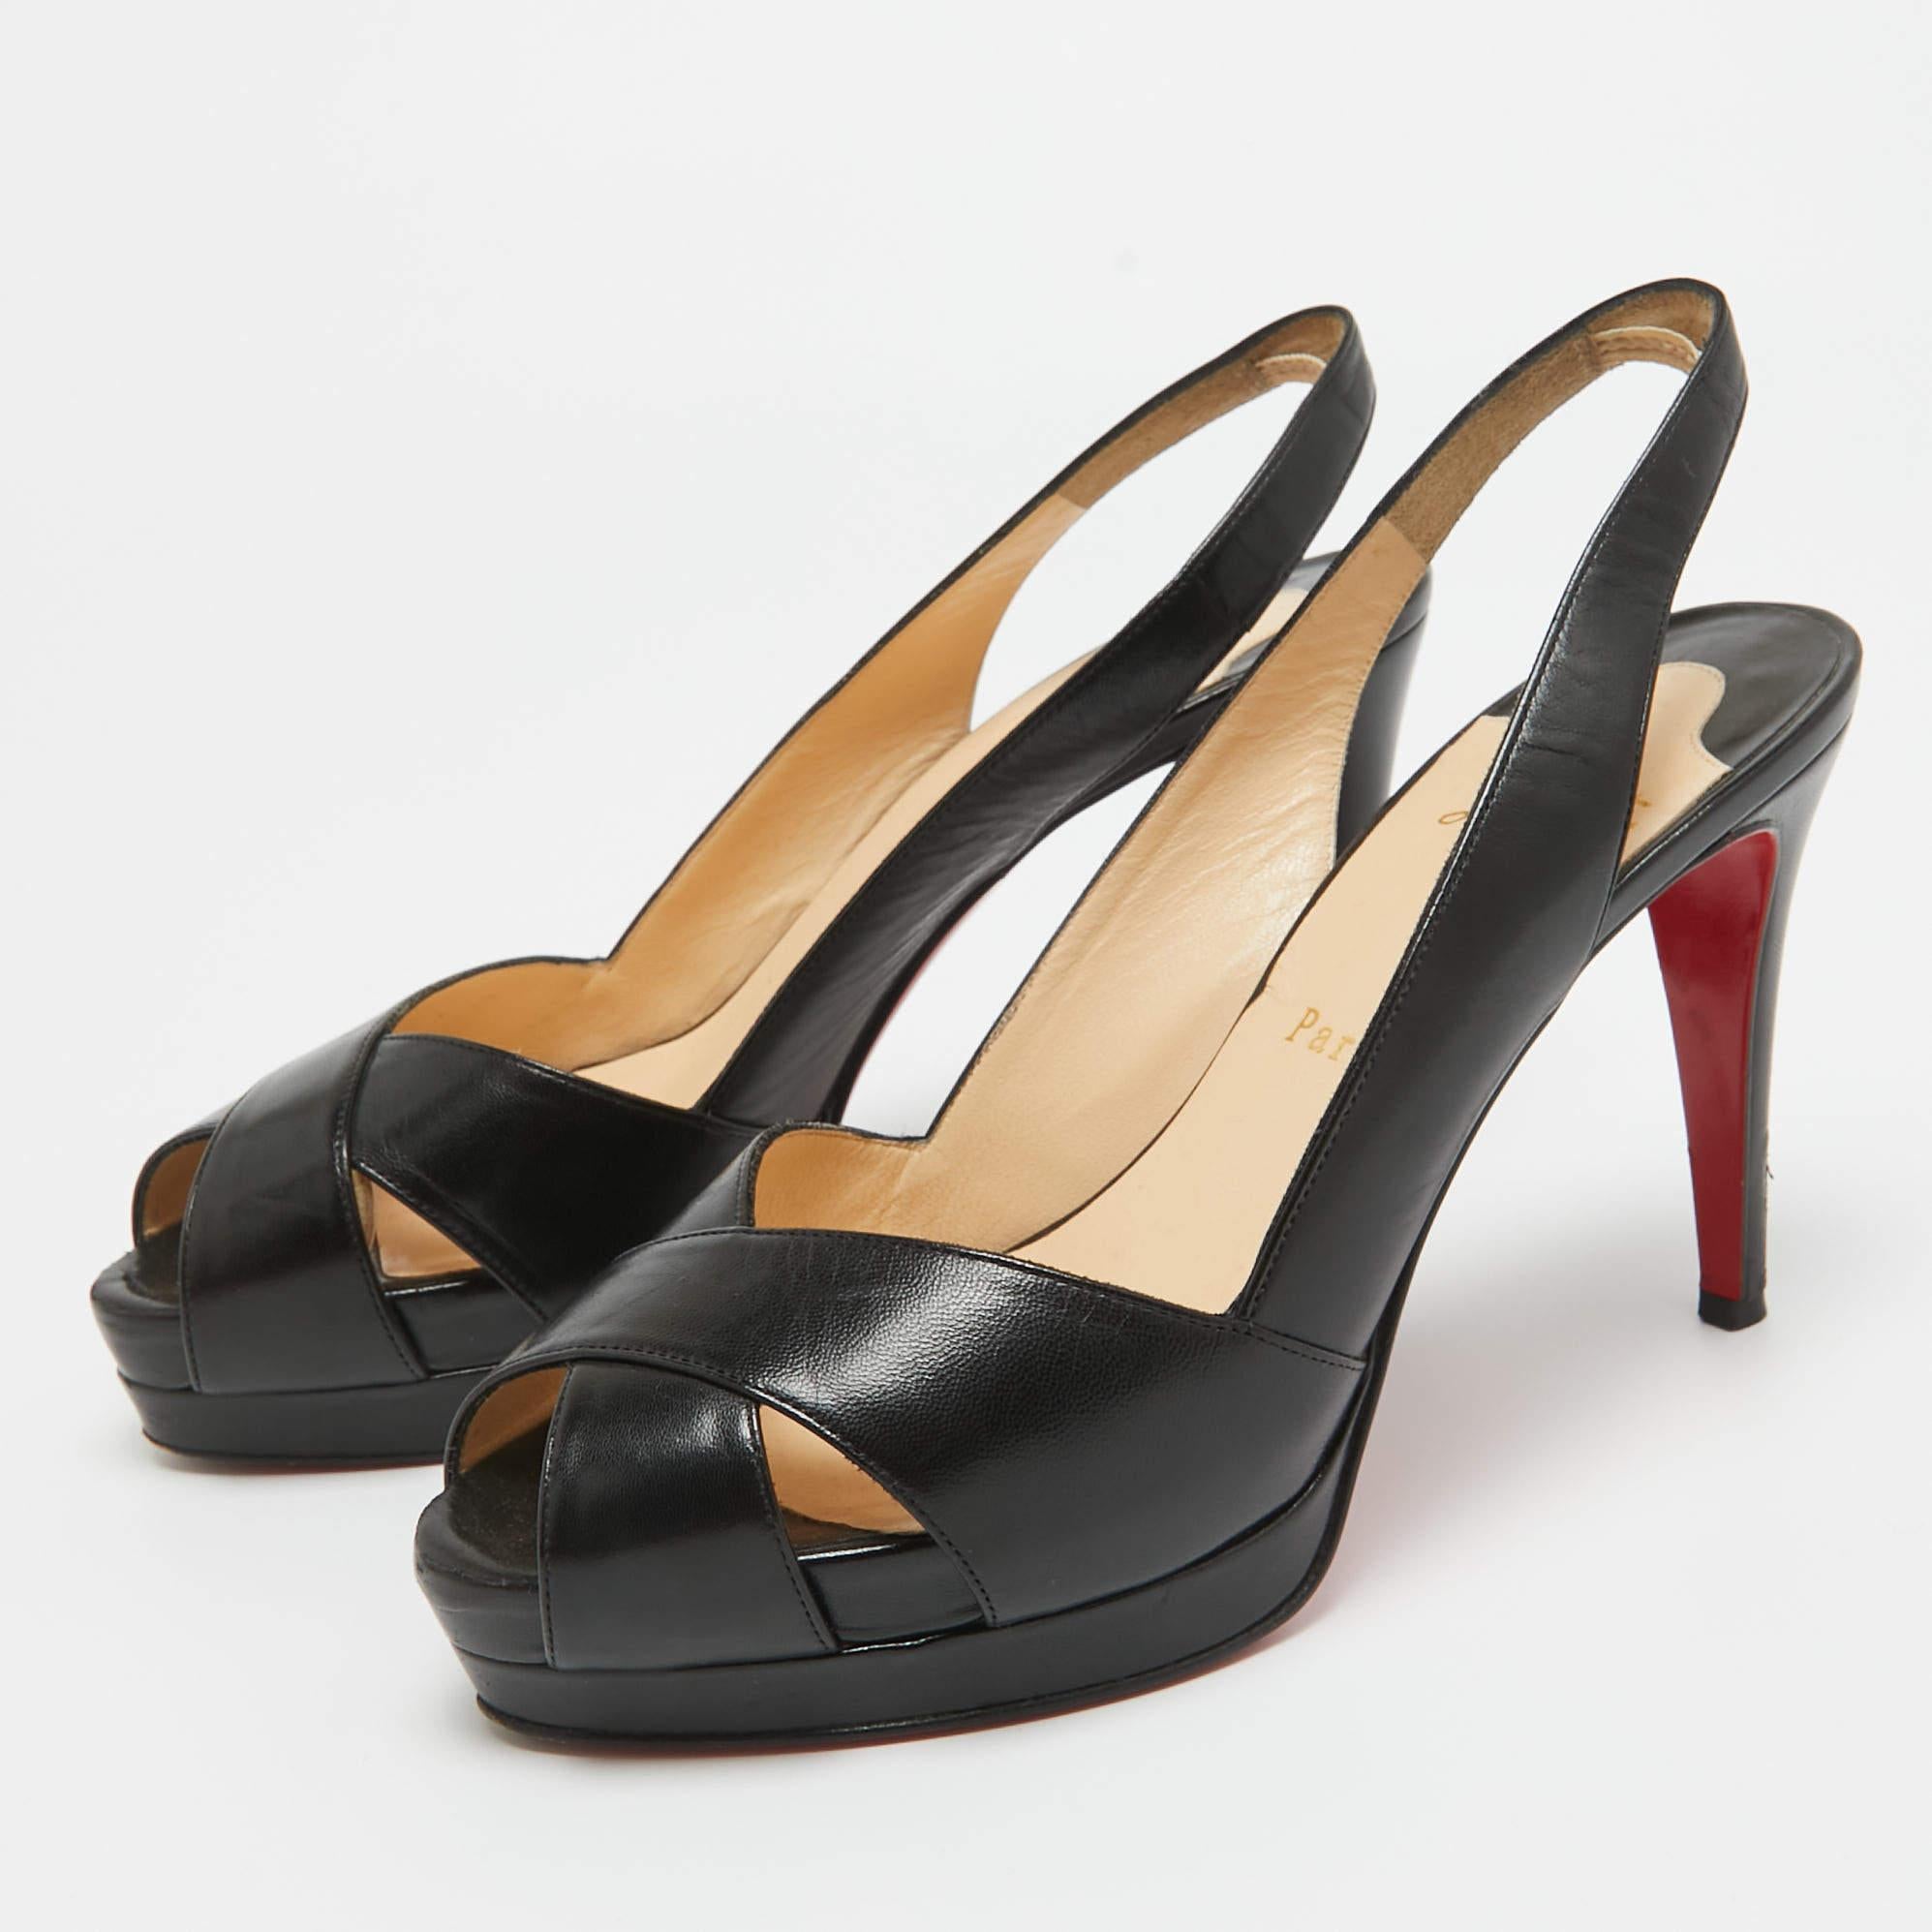 Christian Louboutin Black Leather Soso Slingback Pumps Size 38 For Sale 5